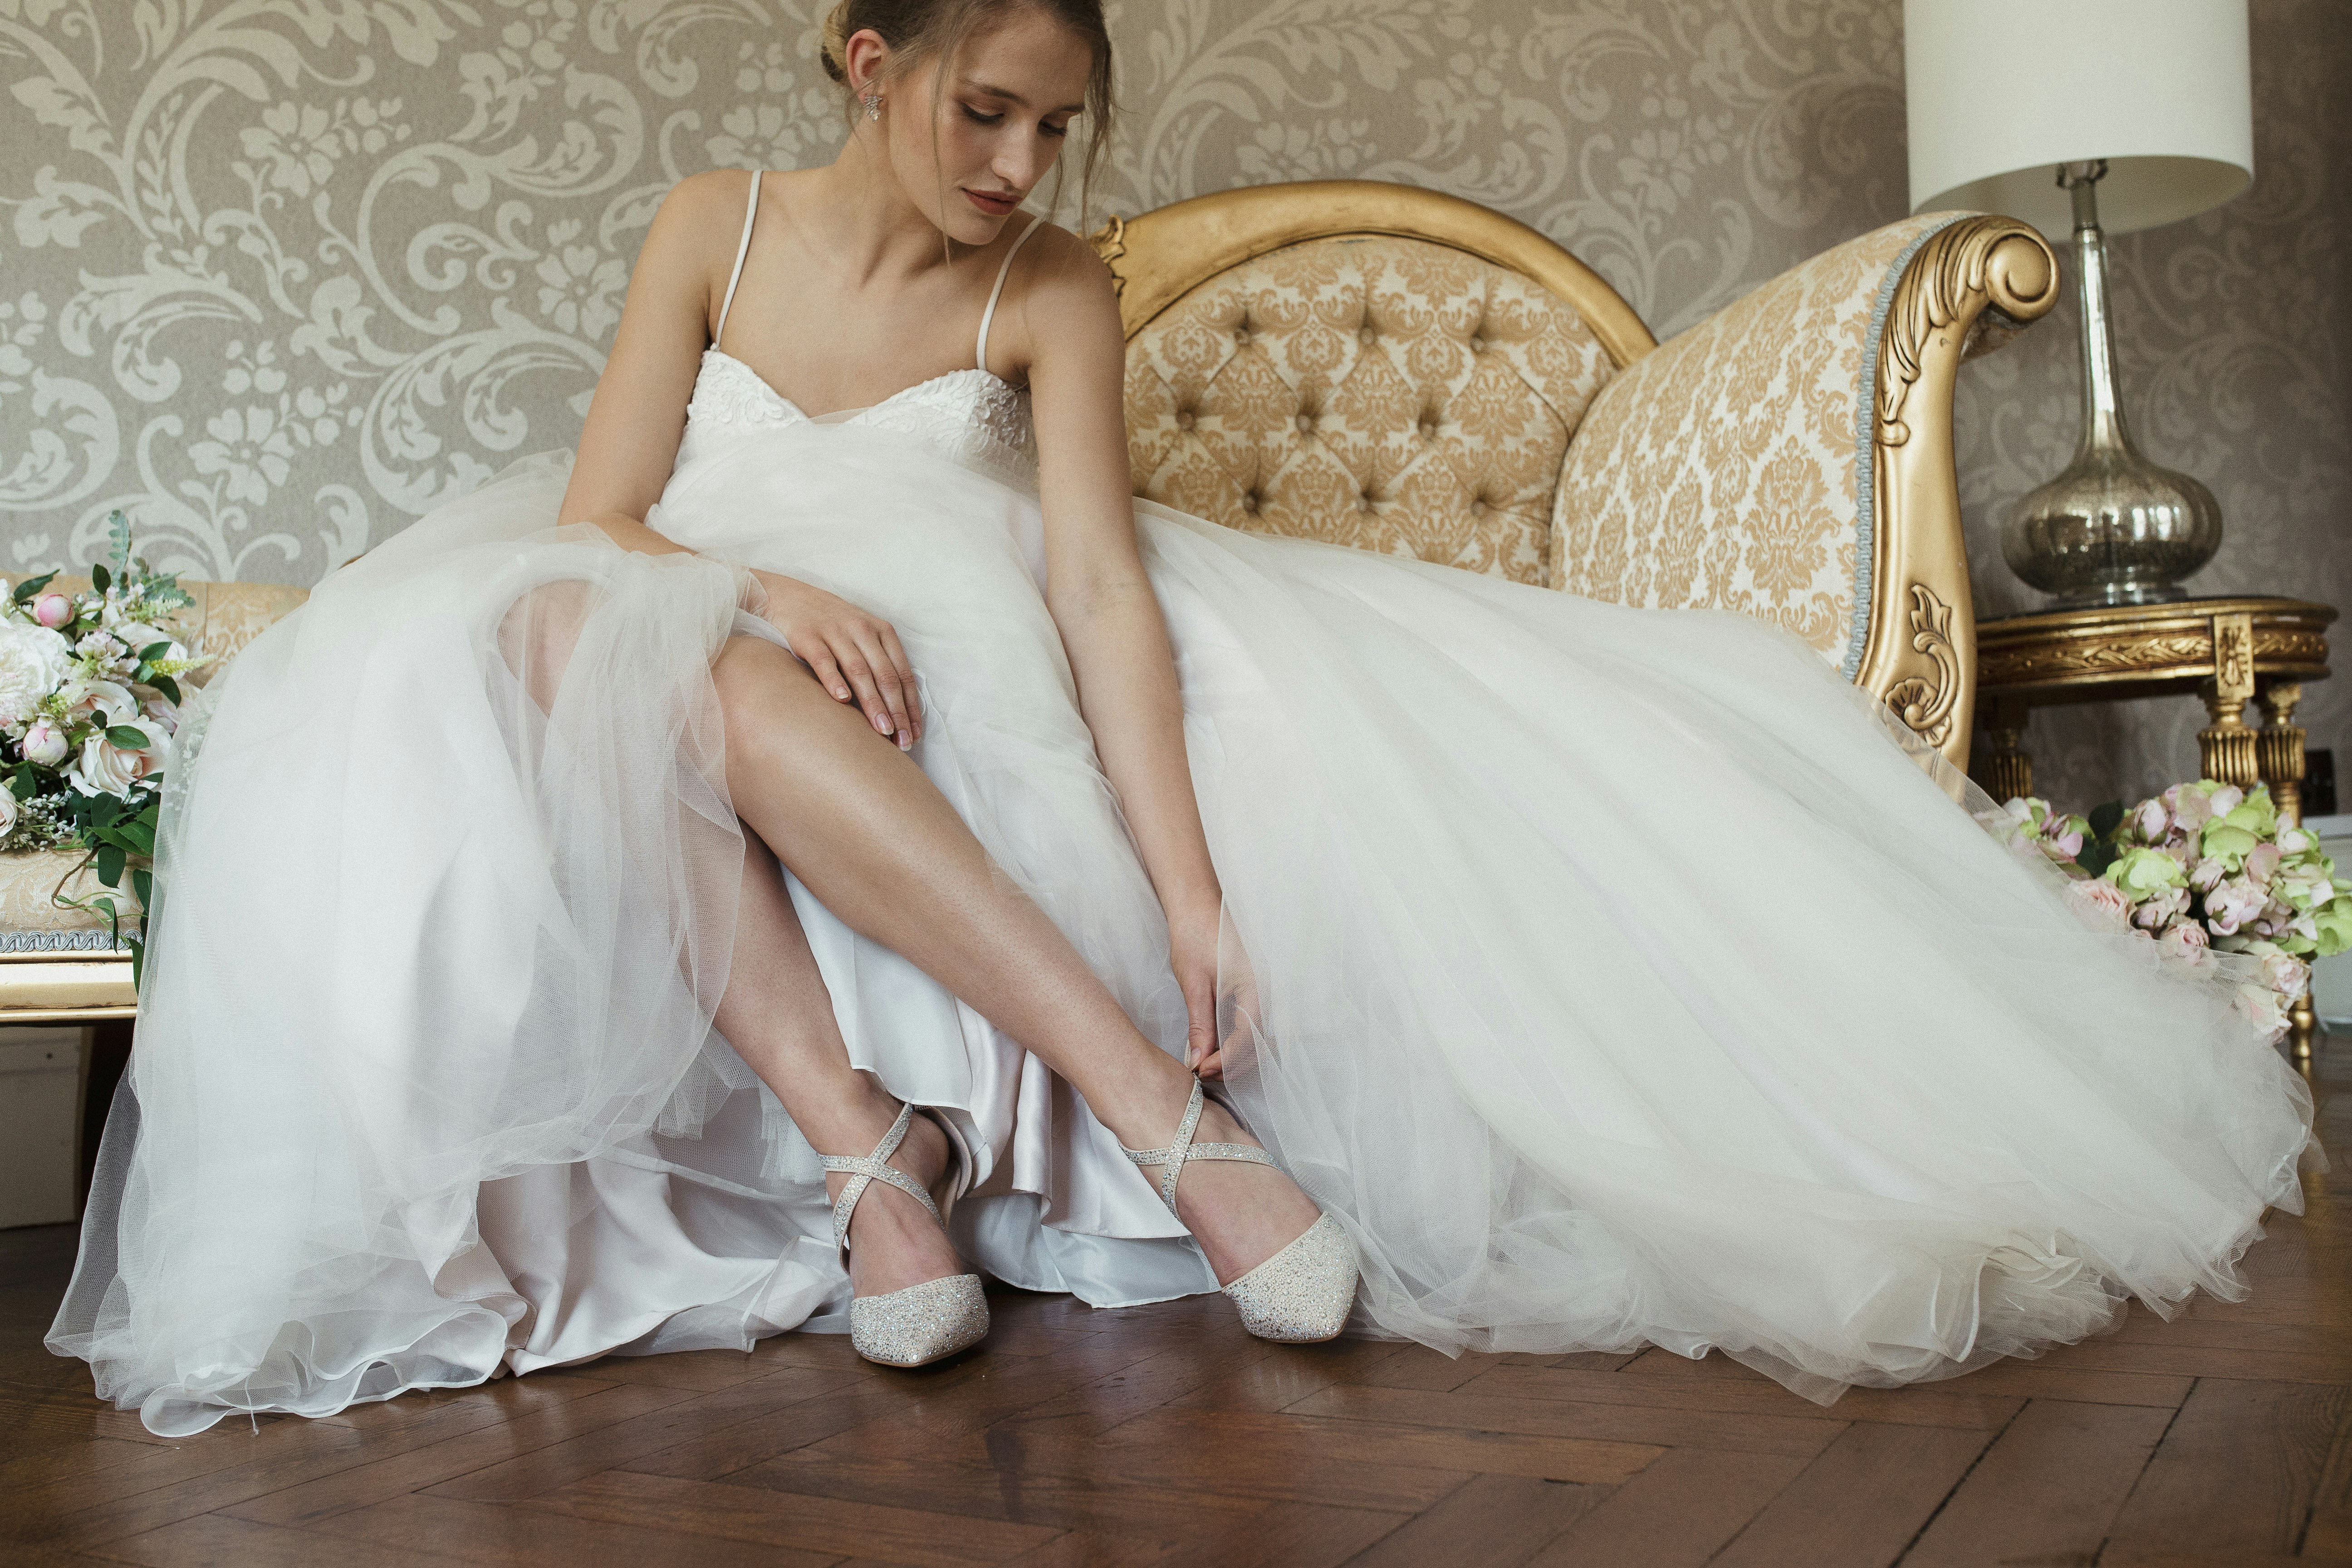 Say I Choo: Explore Jimmy Choo's Bridal Collection & Made To Order